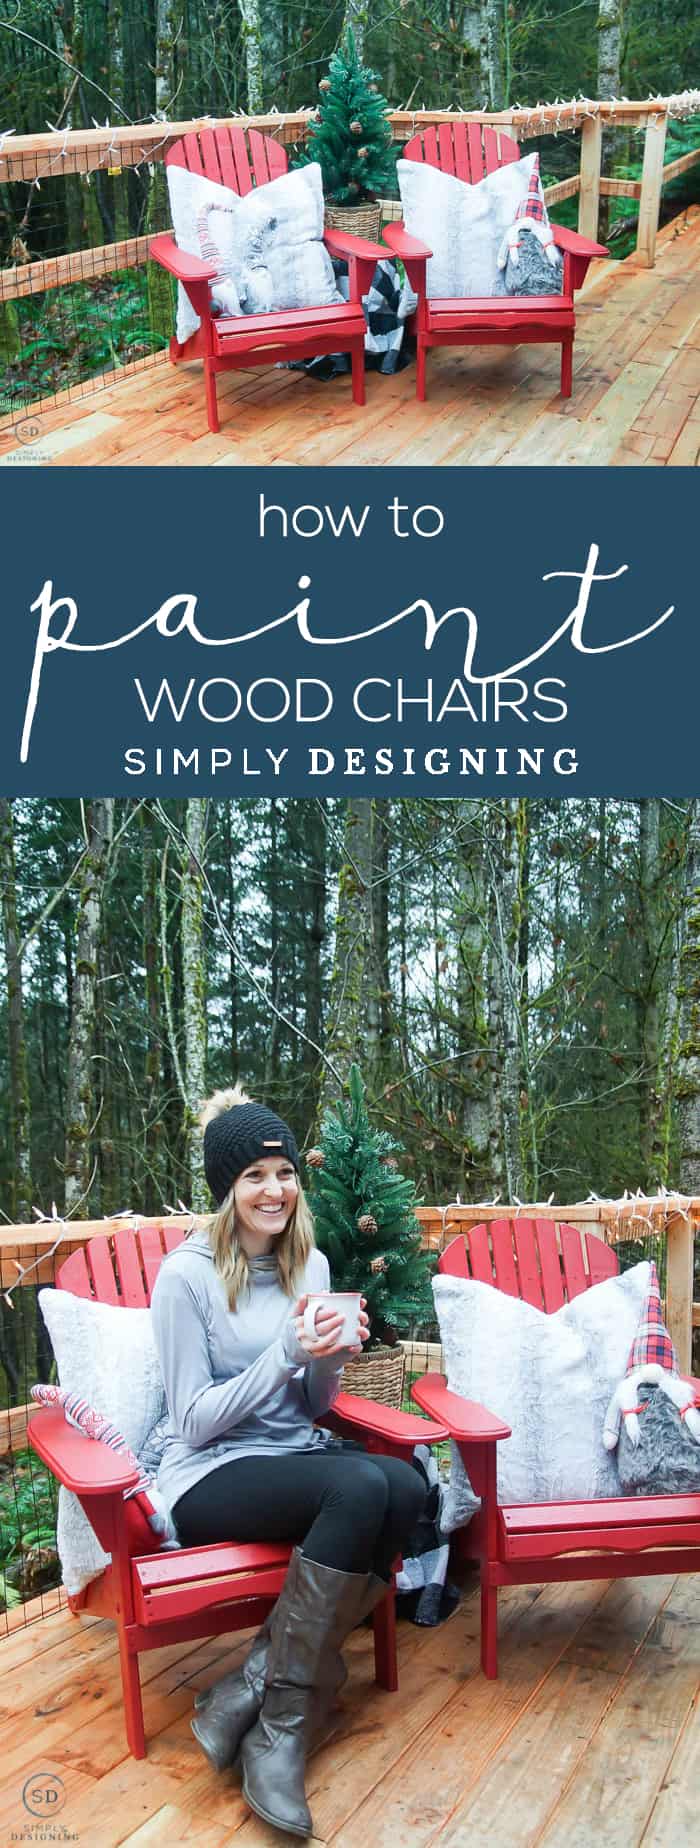 How to Paint Wood Chairs - I am sharing my tips and tricks for How to Paint Wood Chairs easily so that you can get a near-flawless result every single time